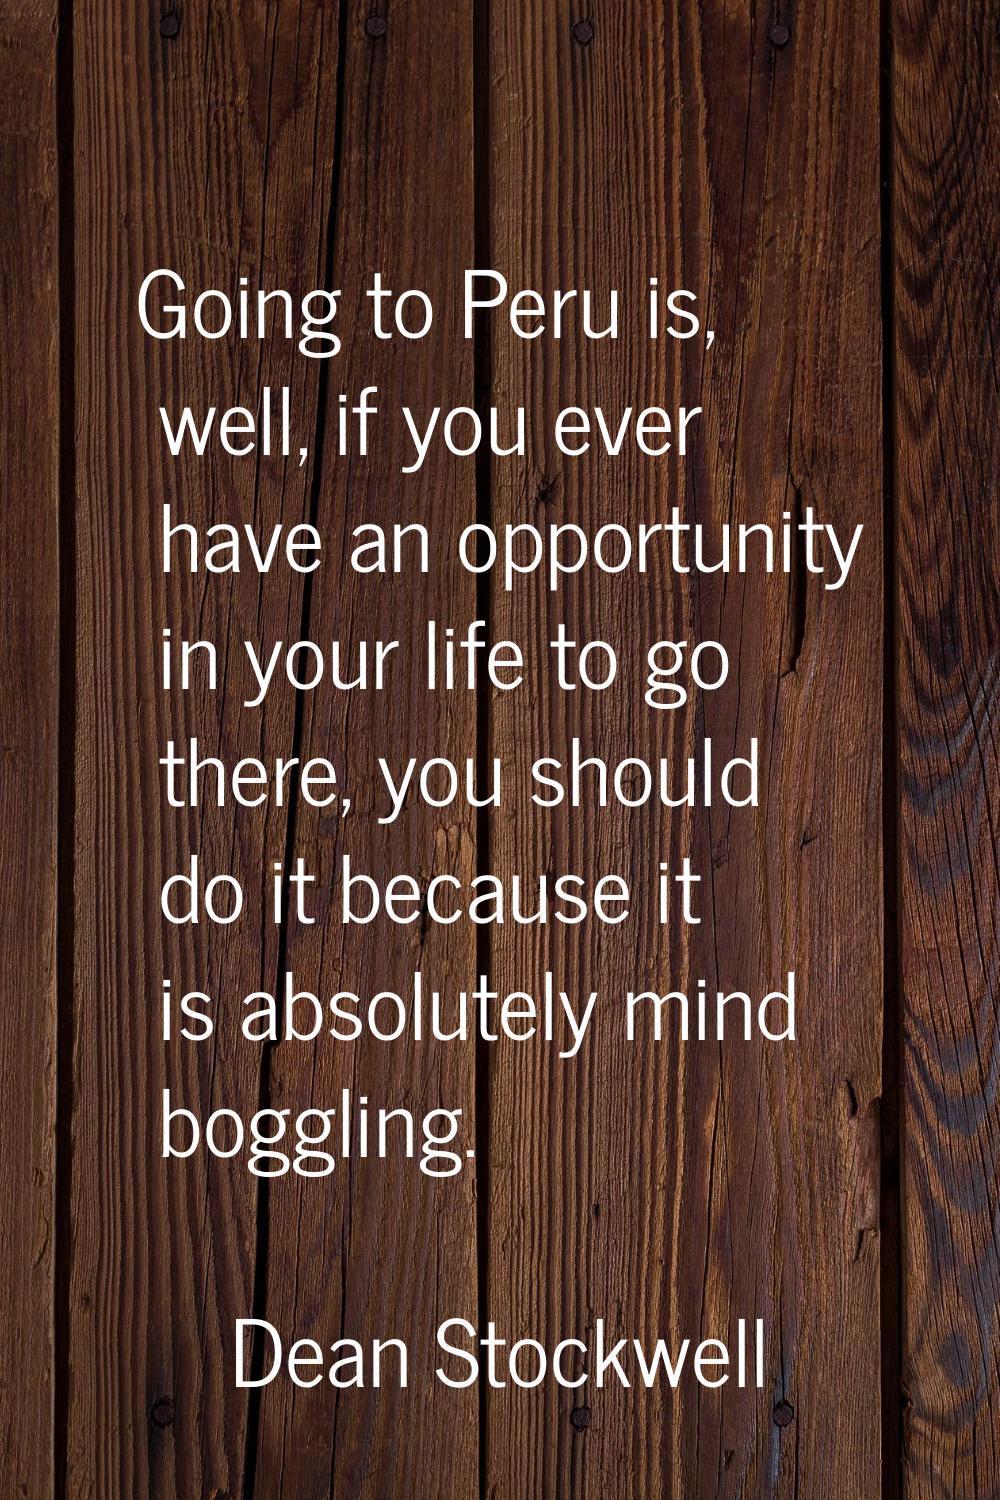 Going to Peru is, well, if you ever have an opportunity in your life to go there, you should do it 